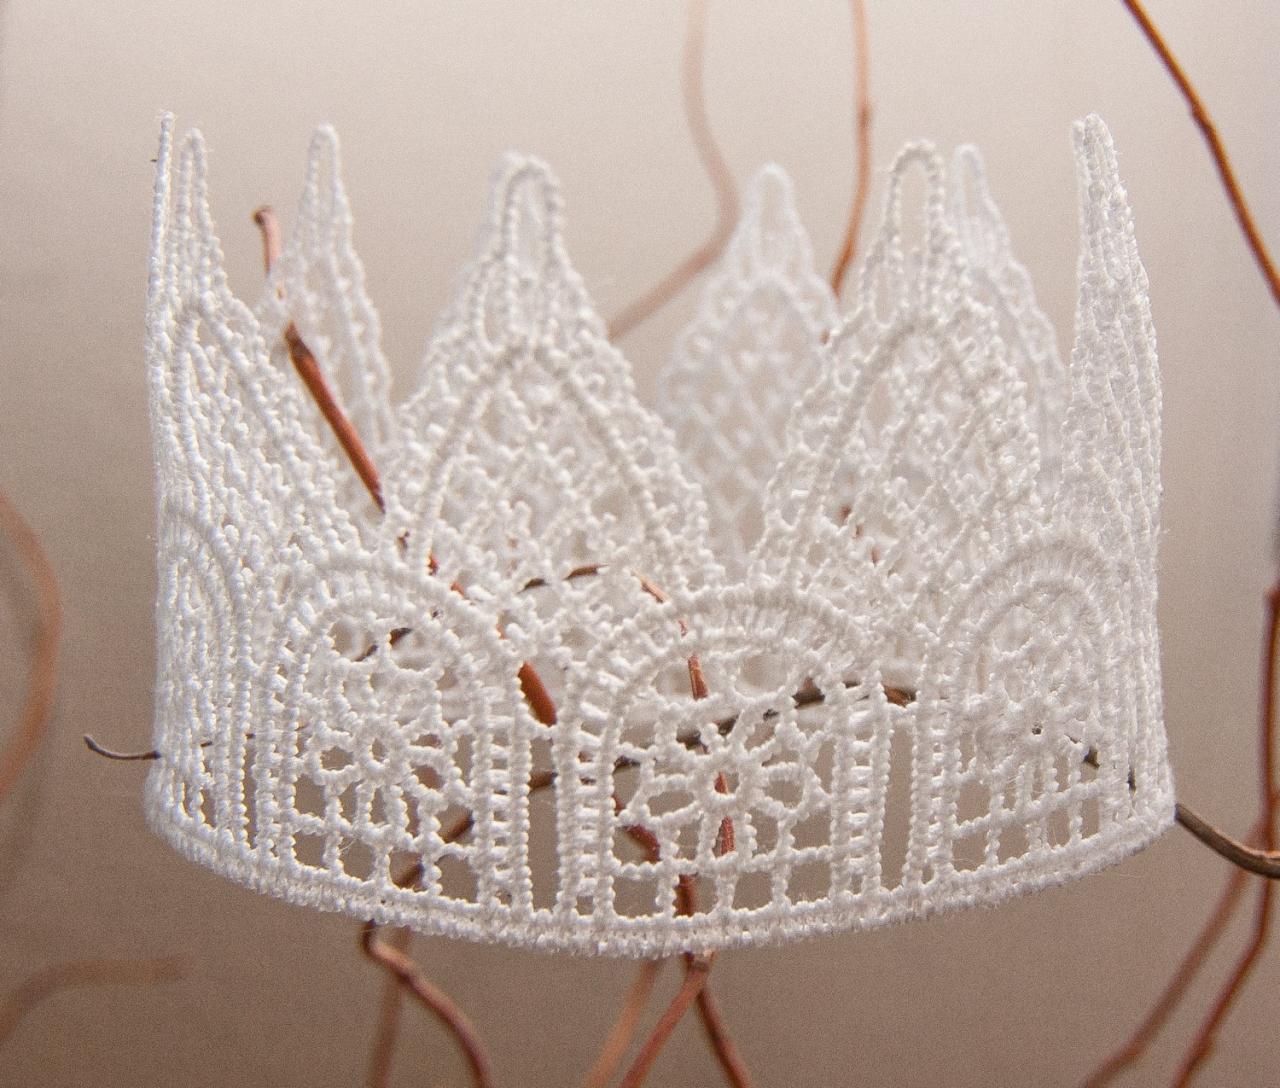 Crown - The Classic Photo Prop